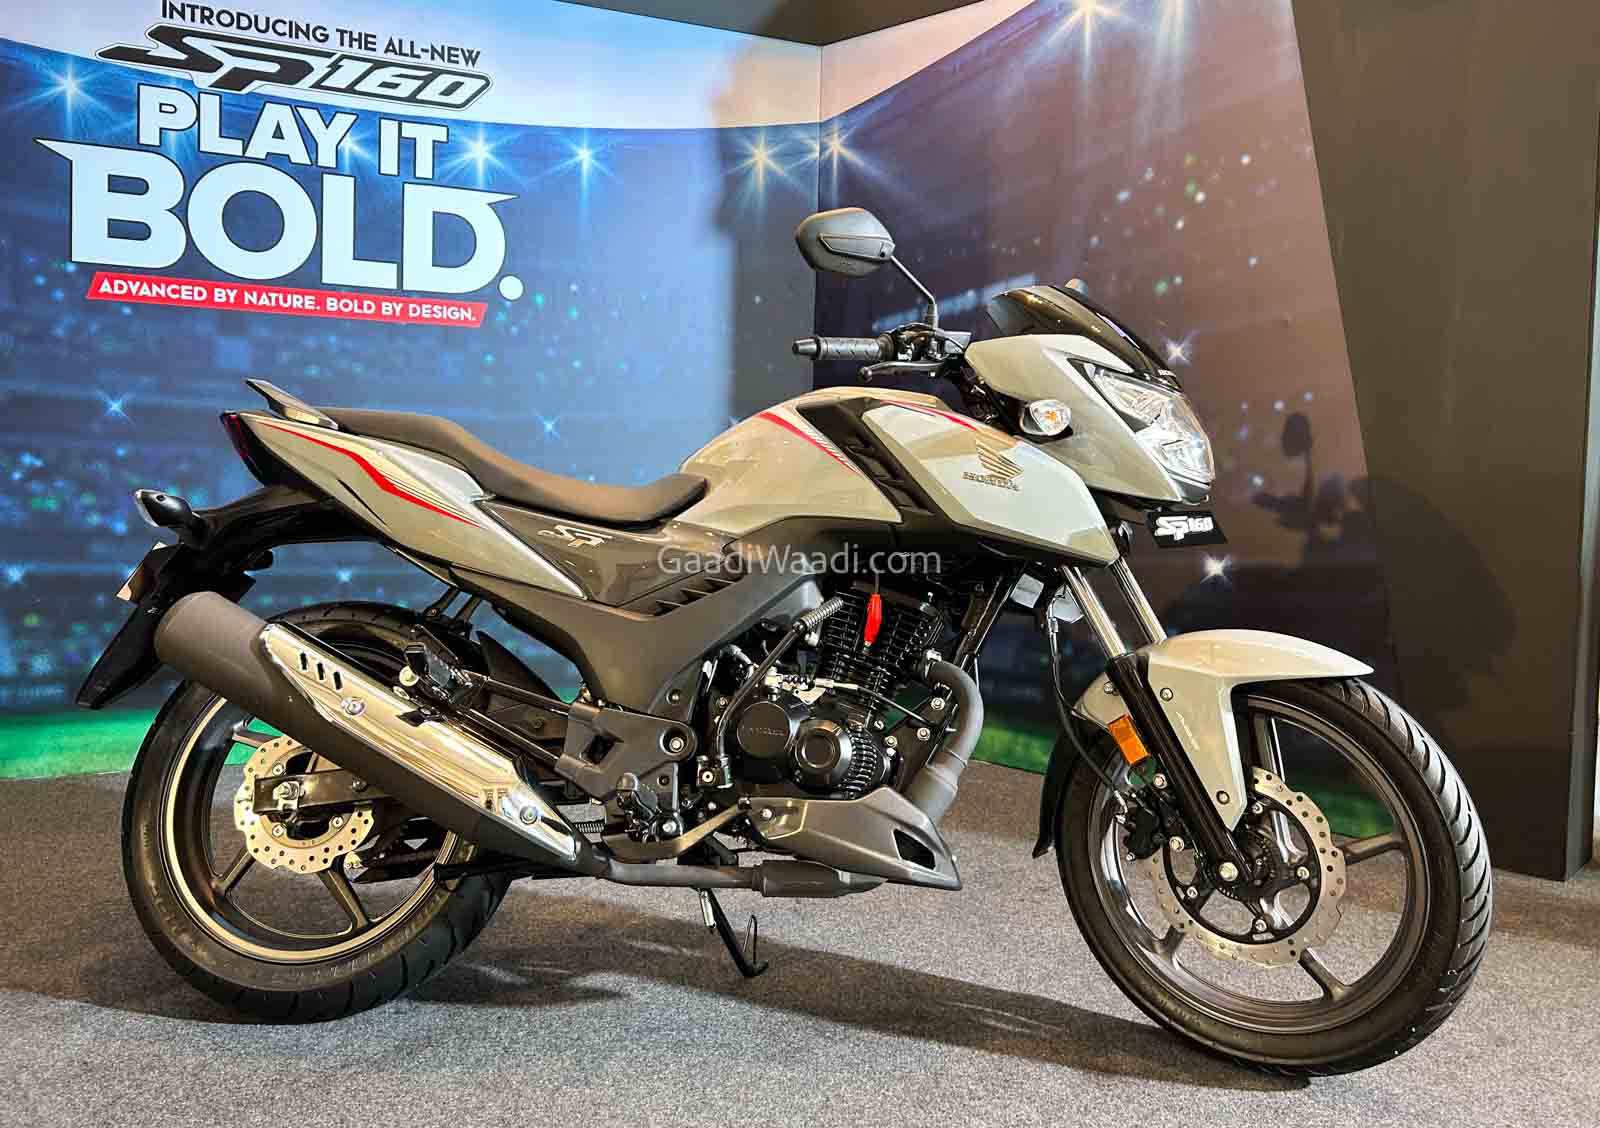 All-New Honda SP160 Launched In India At Rs. 1.17 Lakh